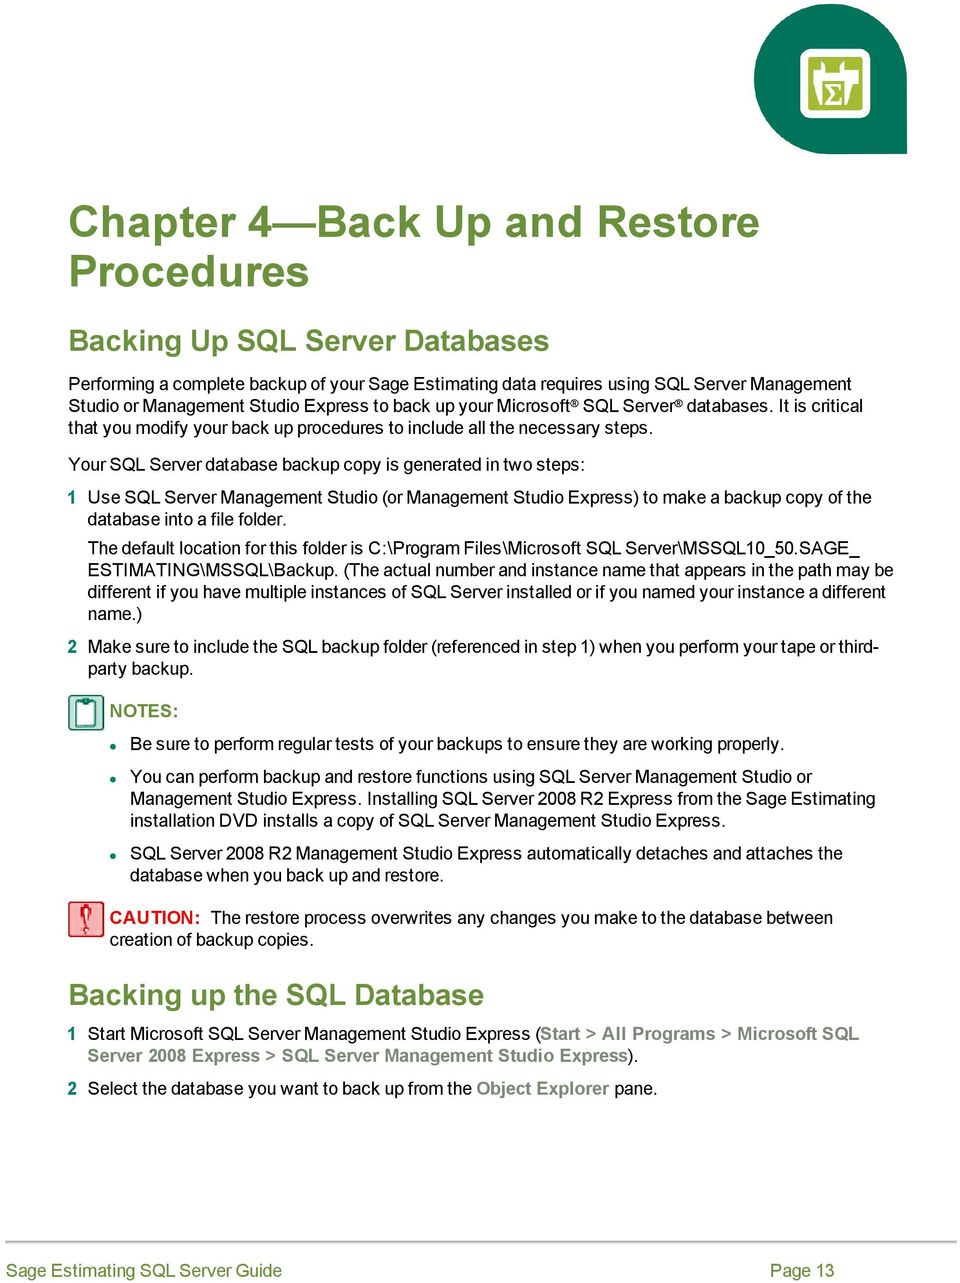 Your SQL Server database backup copy is generated in two steps: 1 Use SQL Server Management Studio (or Management Studio Express) to make a backup copy of the database into a file folder.